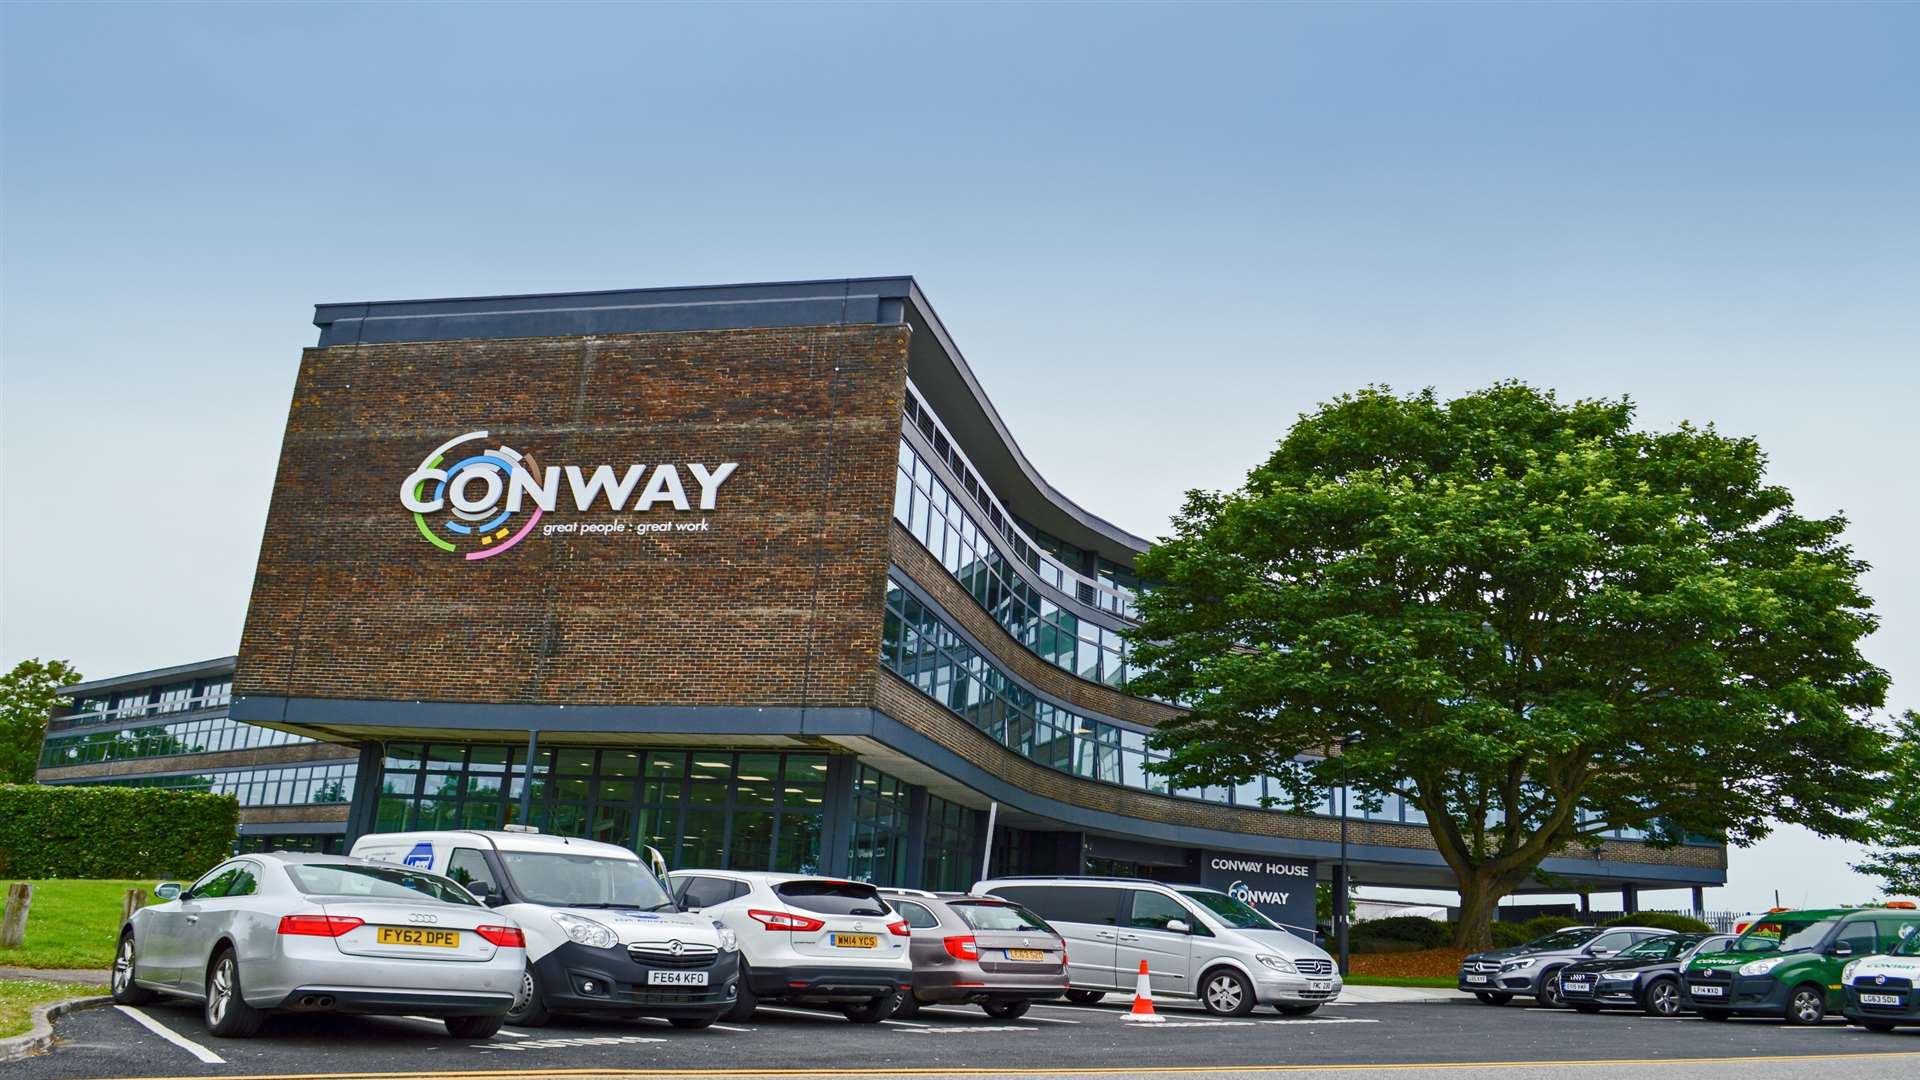 Infrastructure services company FM Conway moved to a new headquarters in Sevenoaks in 2016